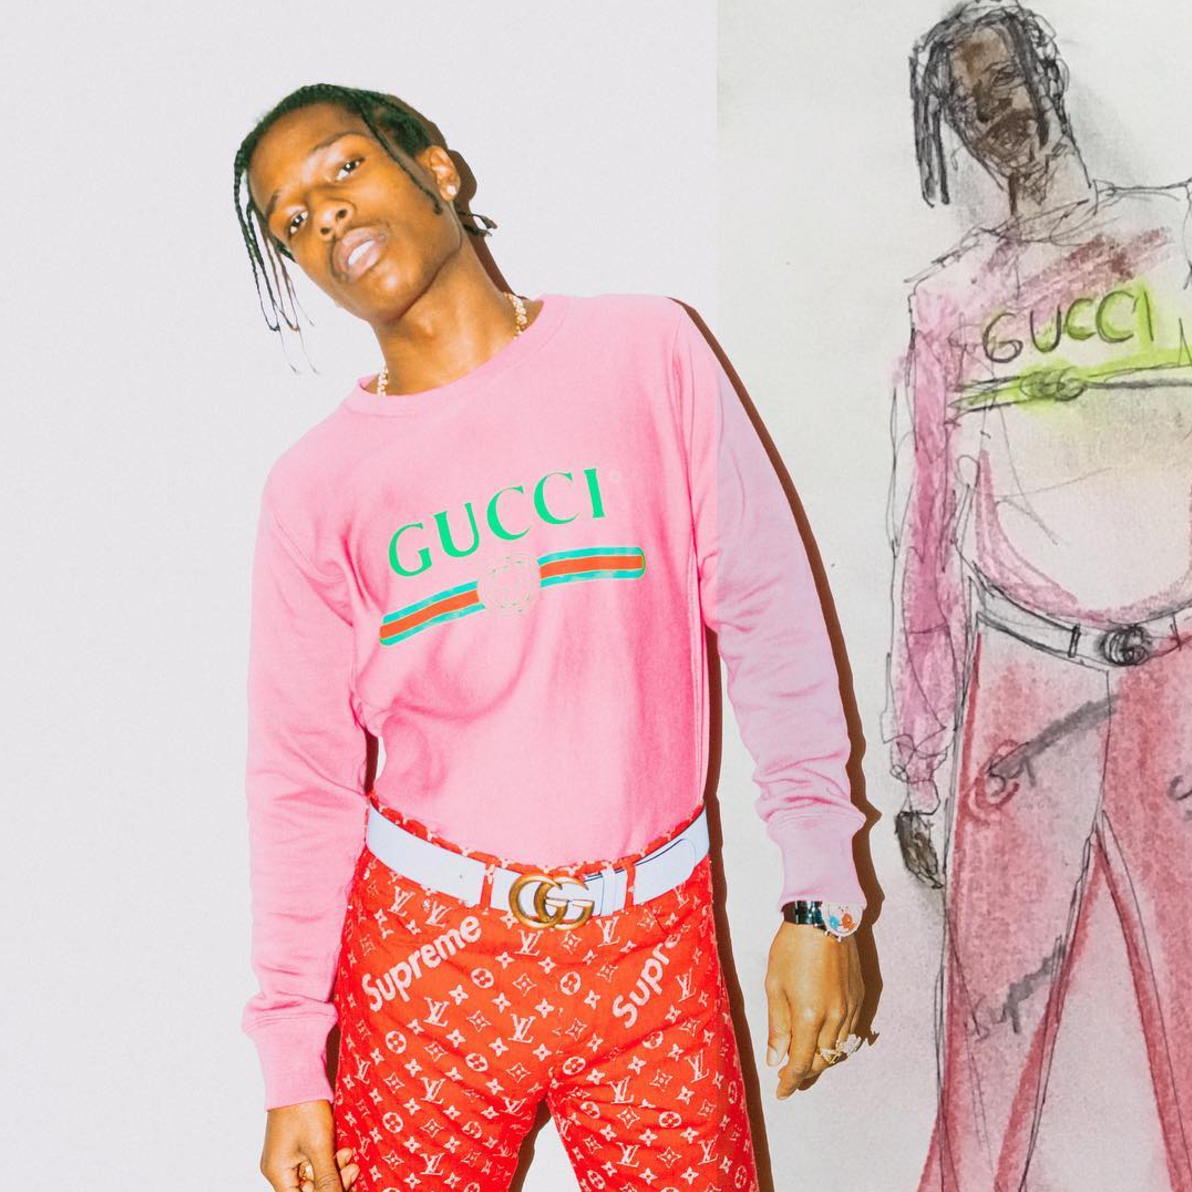 SPOTTED: A$AP Rocky In Gucci Sweater And 1/1 Supreme x Louis Vuitton Pants